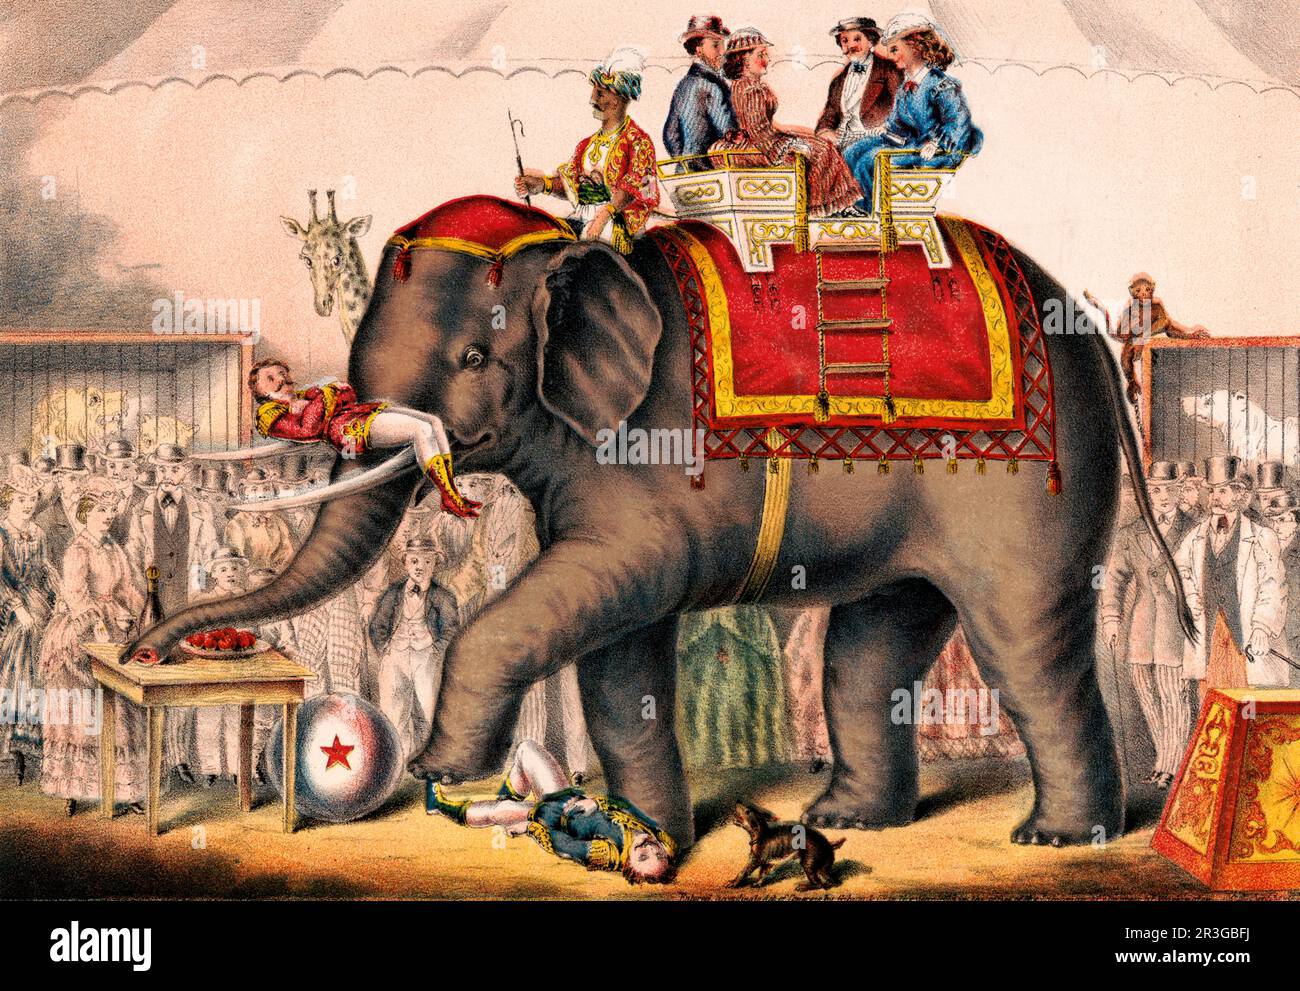 Vintage print of men performing a circus act with an elephant. Stock Photo